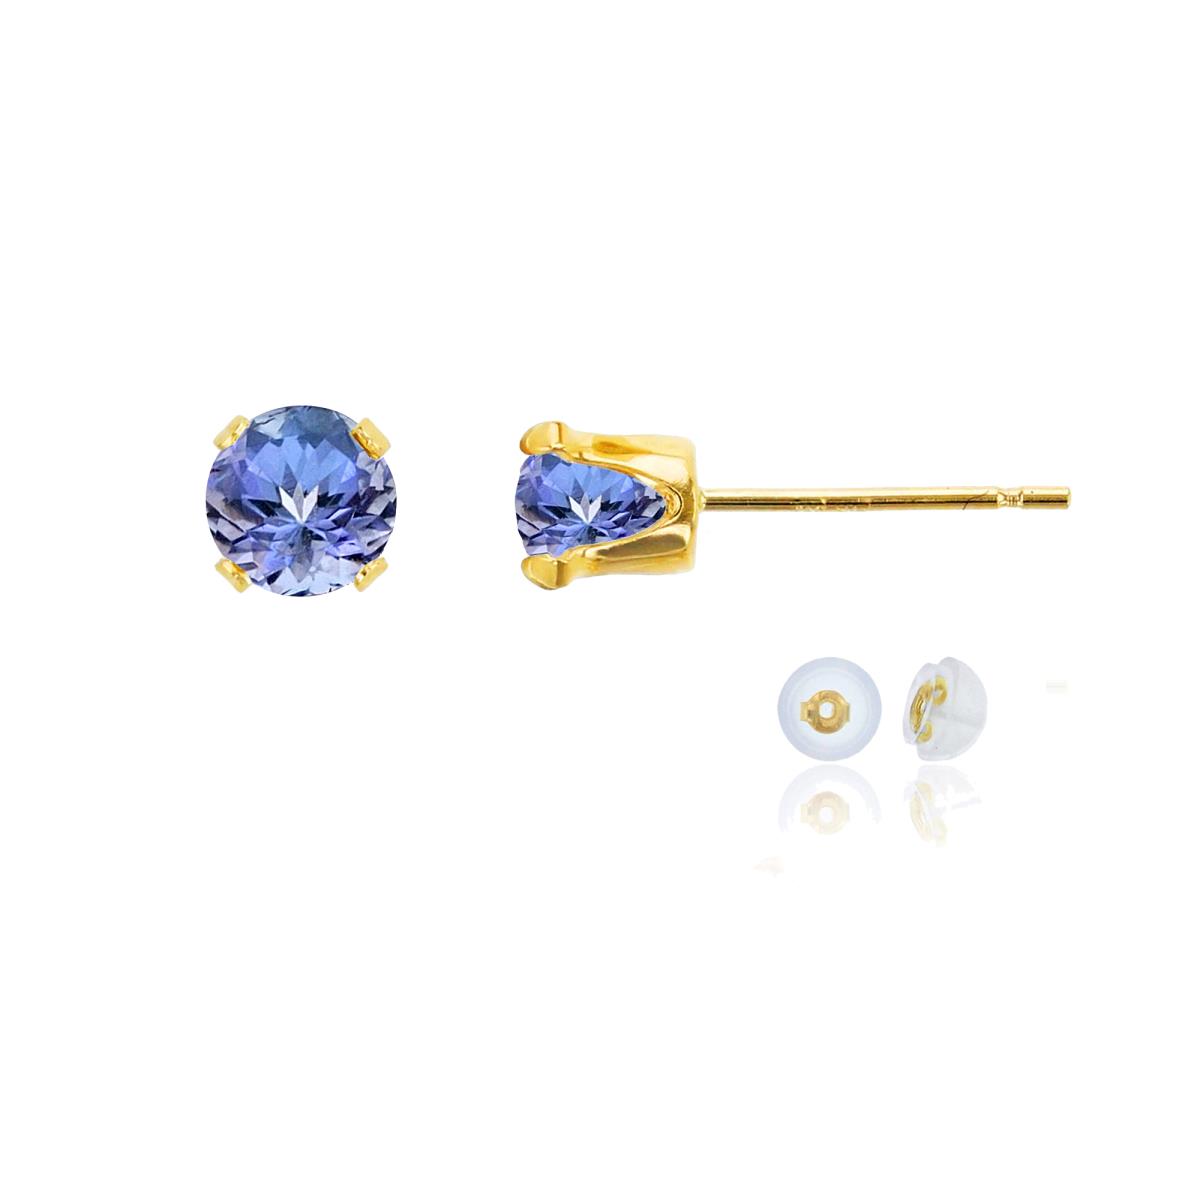 10K Yellow Gold 5mm Round Tanzanite Stud Earring with Silicone Back